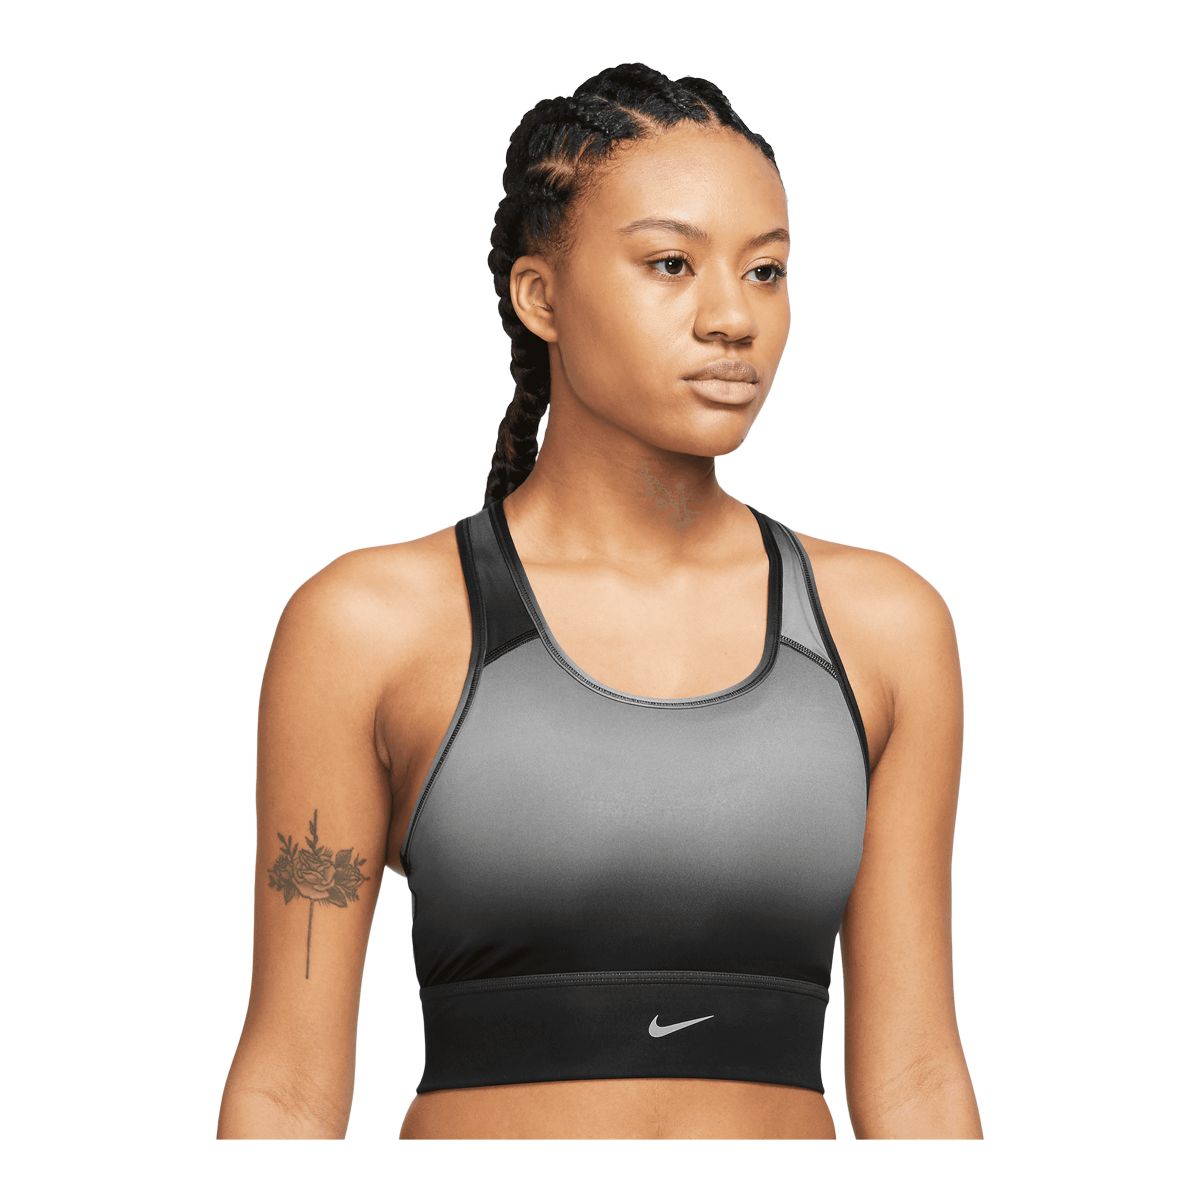 Yoga Sport Women Bra Longline Athletic Workout Crop Tops With